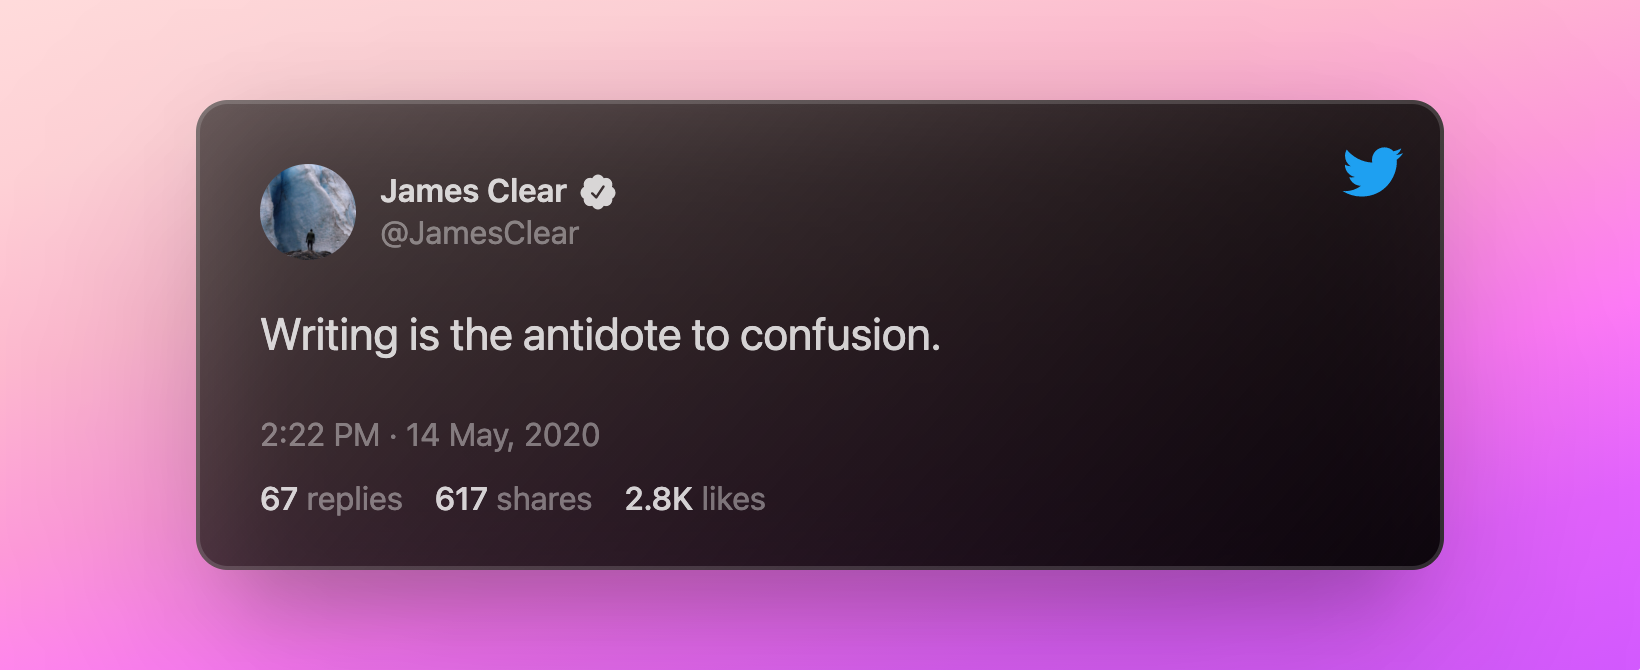 tweet by james clear with pink background